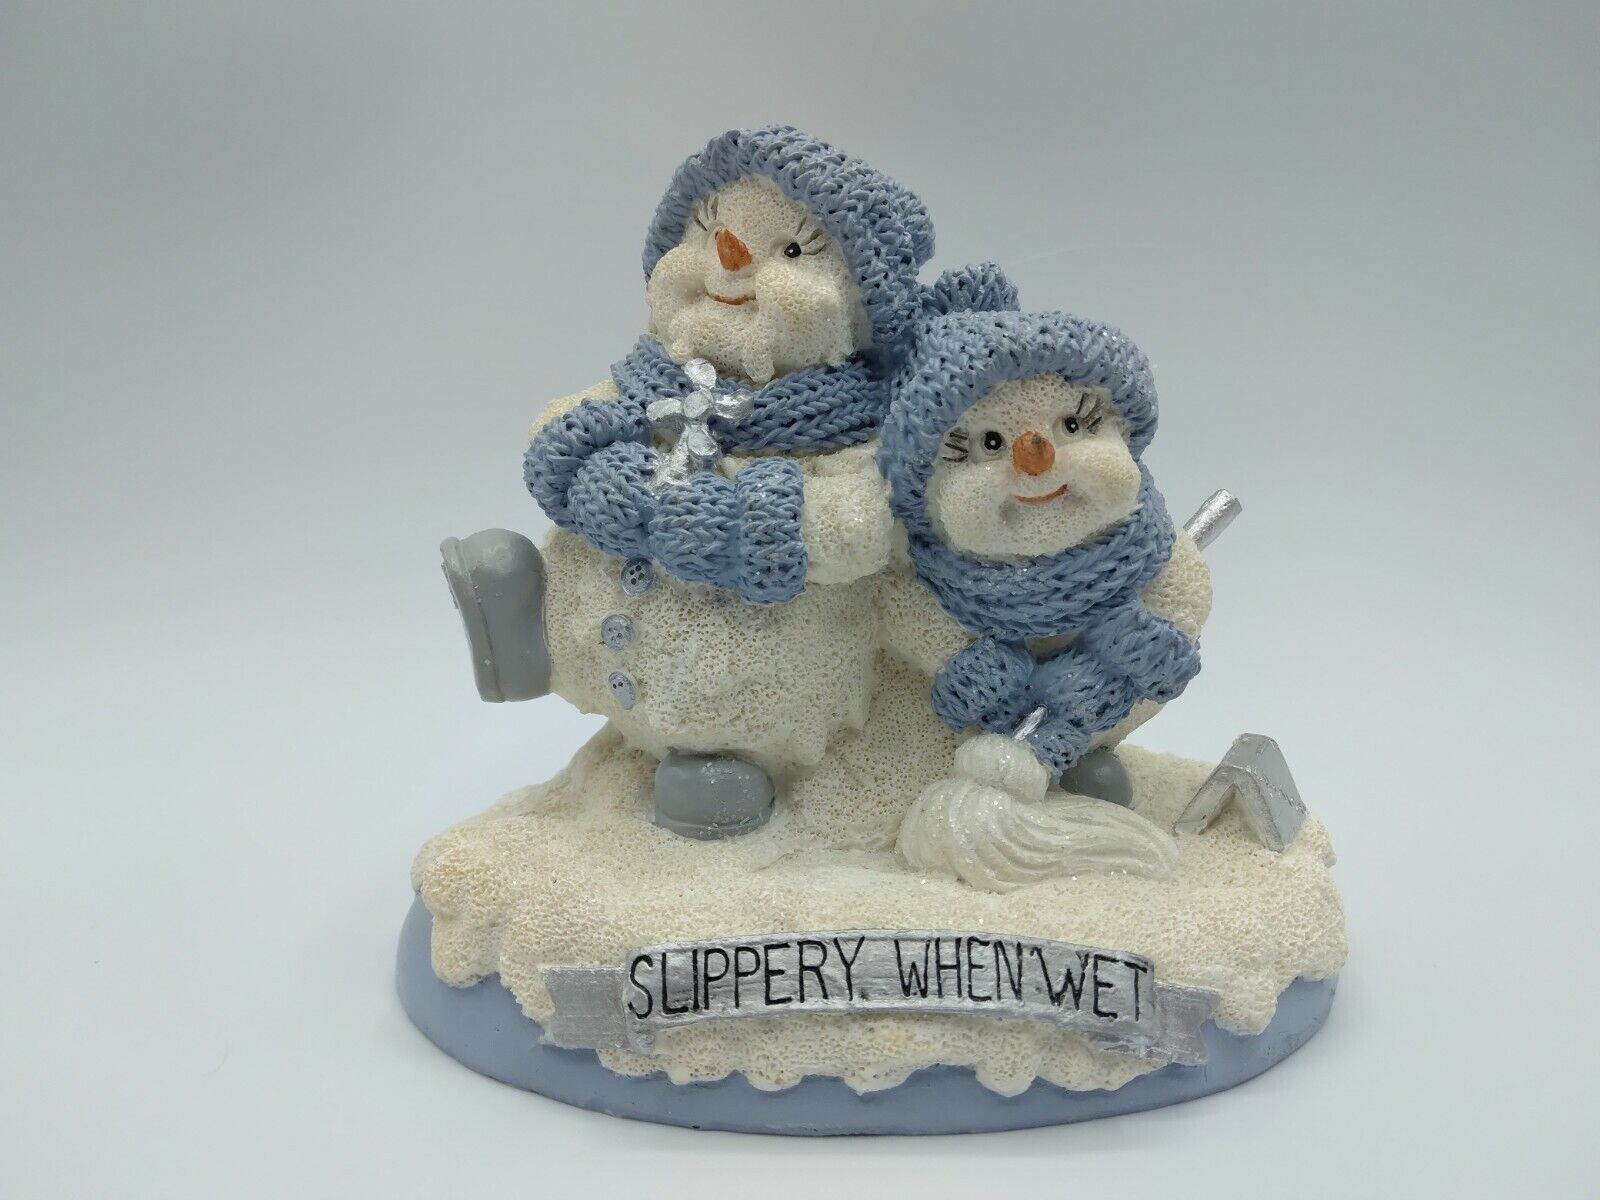 Encore 2000 Snow Buddies Melty Slippery When Wet #94455